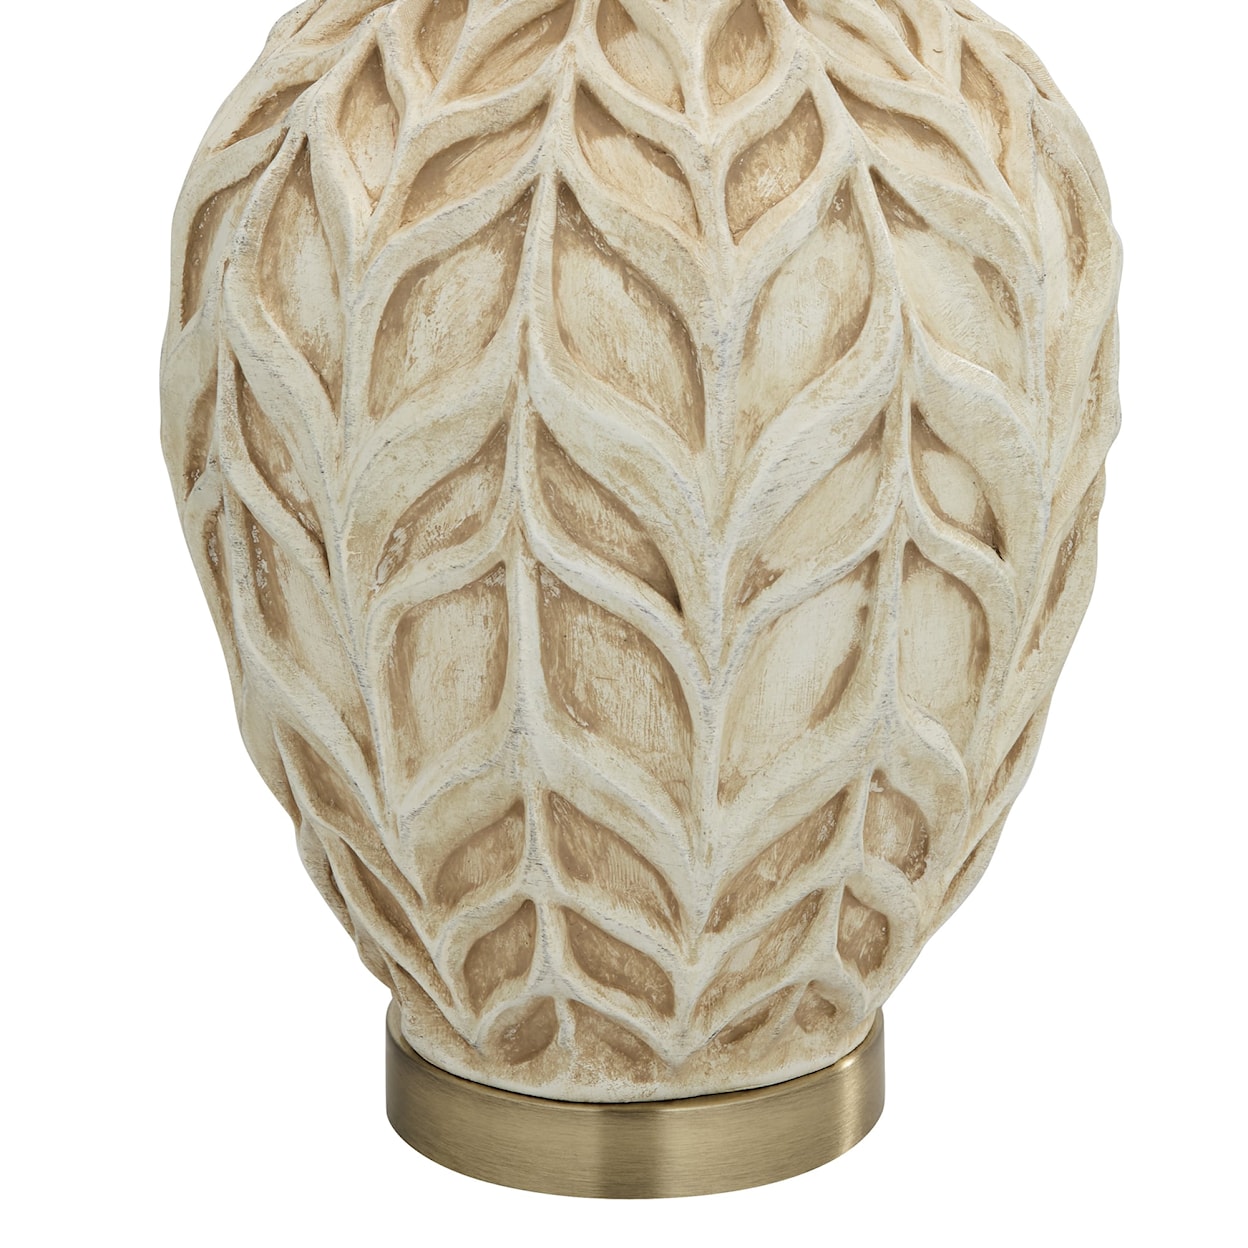 Pacific Coast Lighting Pacific Coast Lighting TL-29.5" Poly vase with zigzag pattern